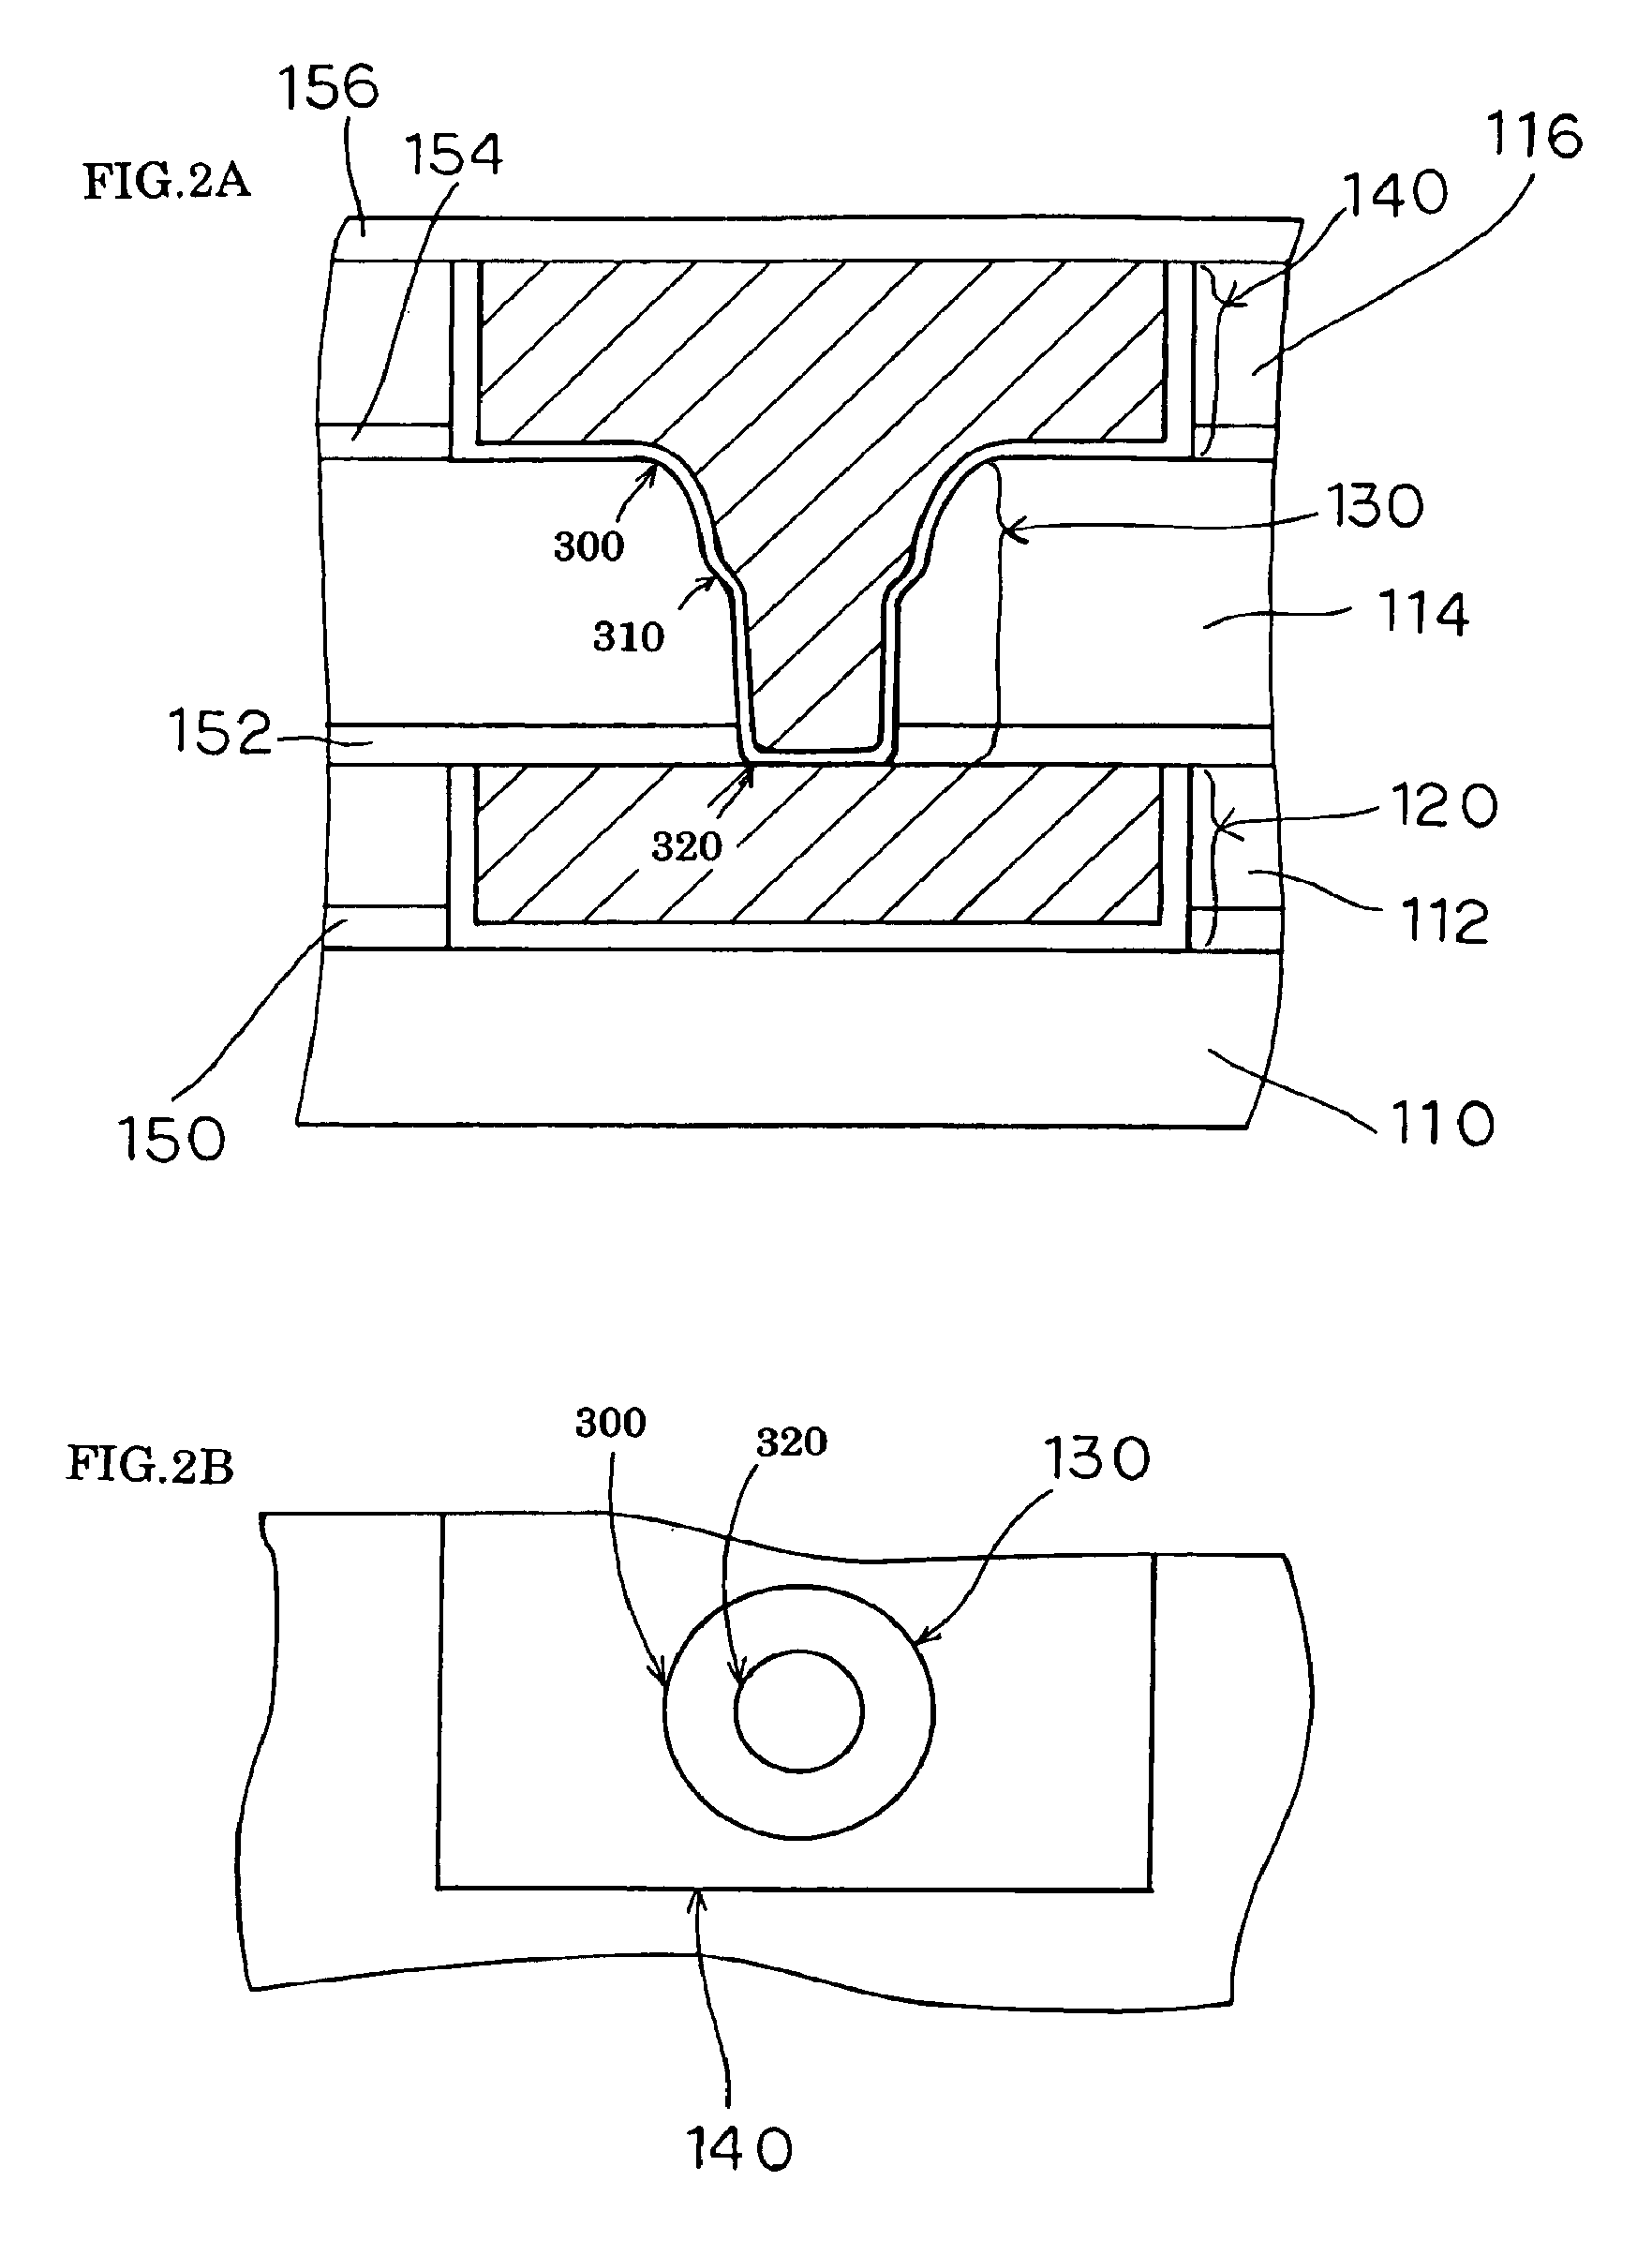 Semiconductor device with interconnection structure for reducing stress migration